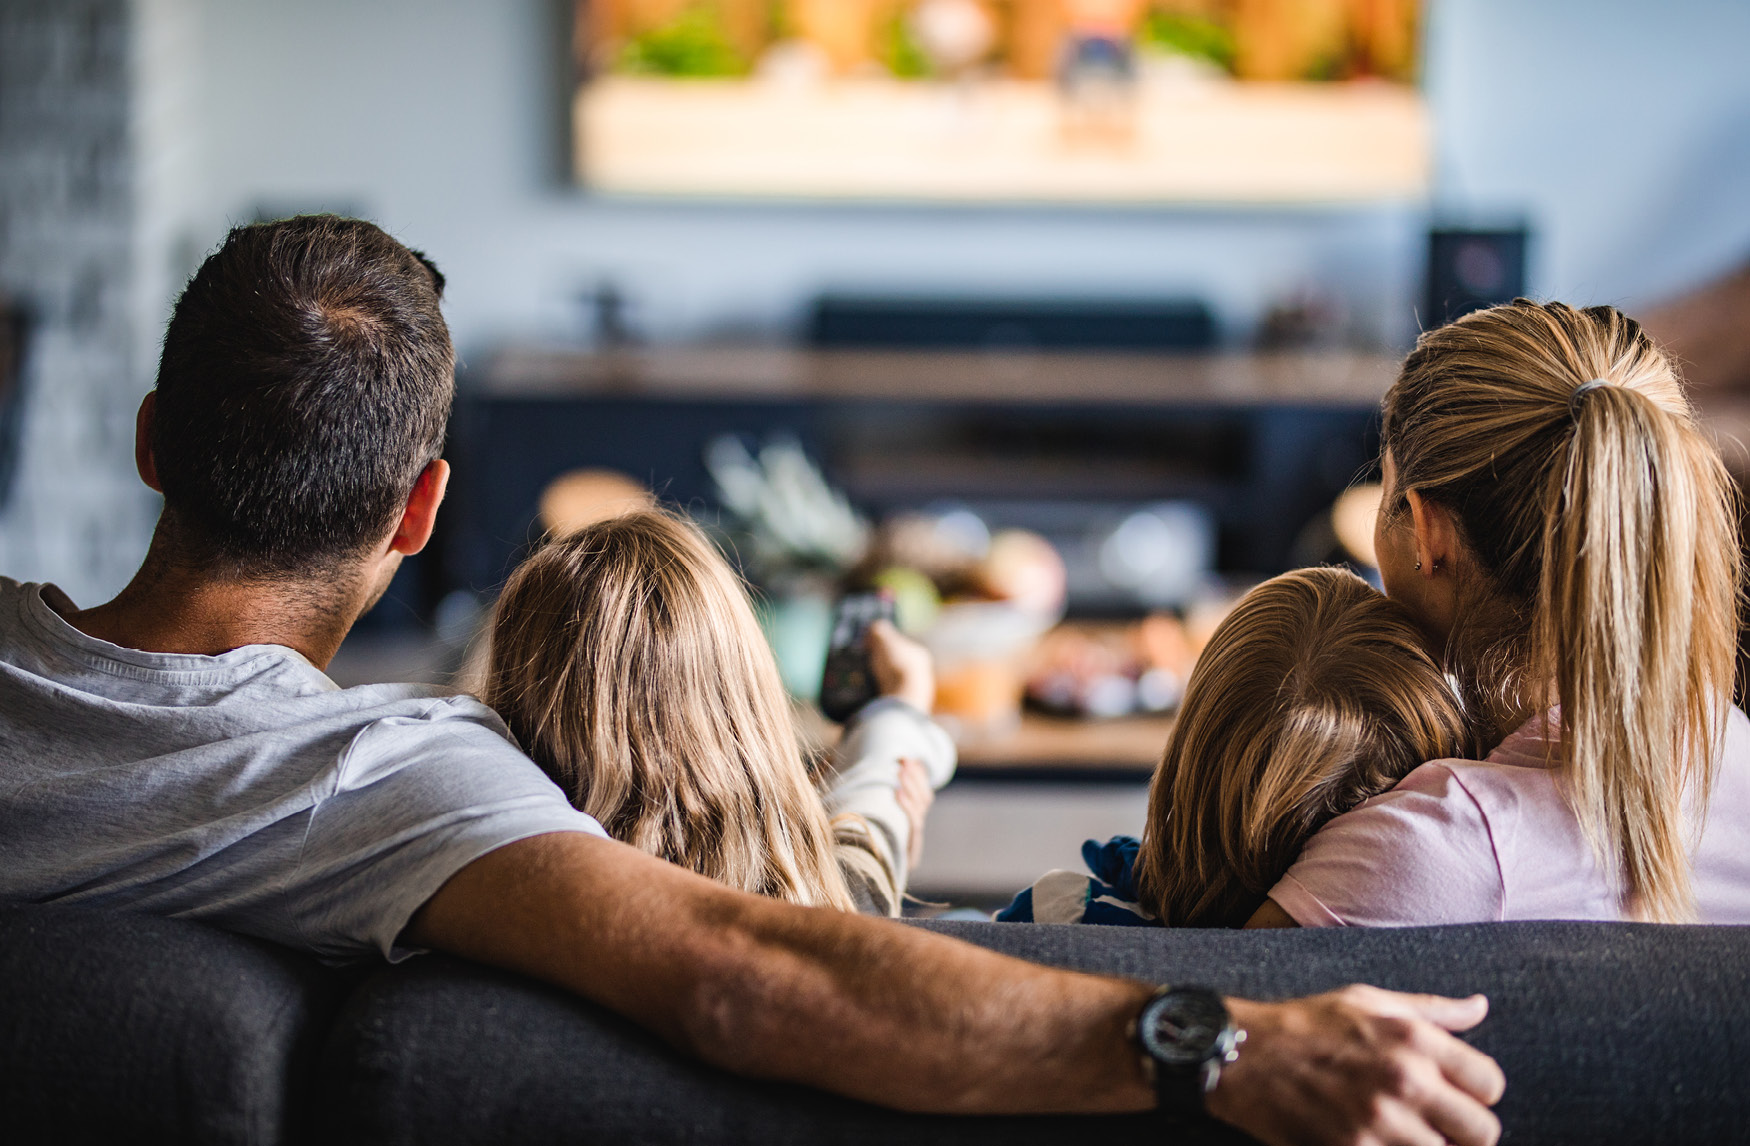 Clearewave Fiber website photography — family watching TV in living room